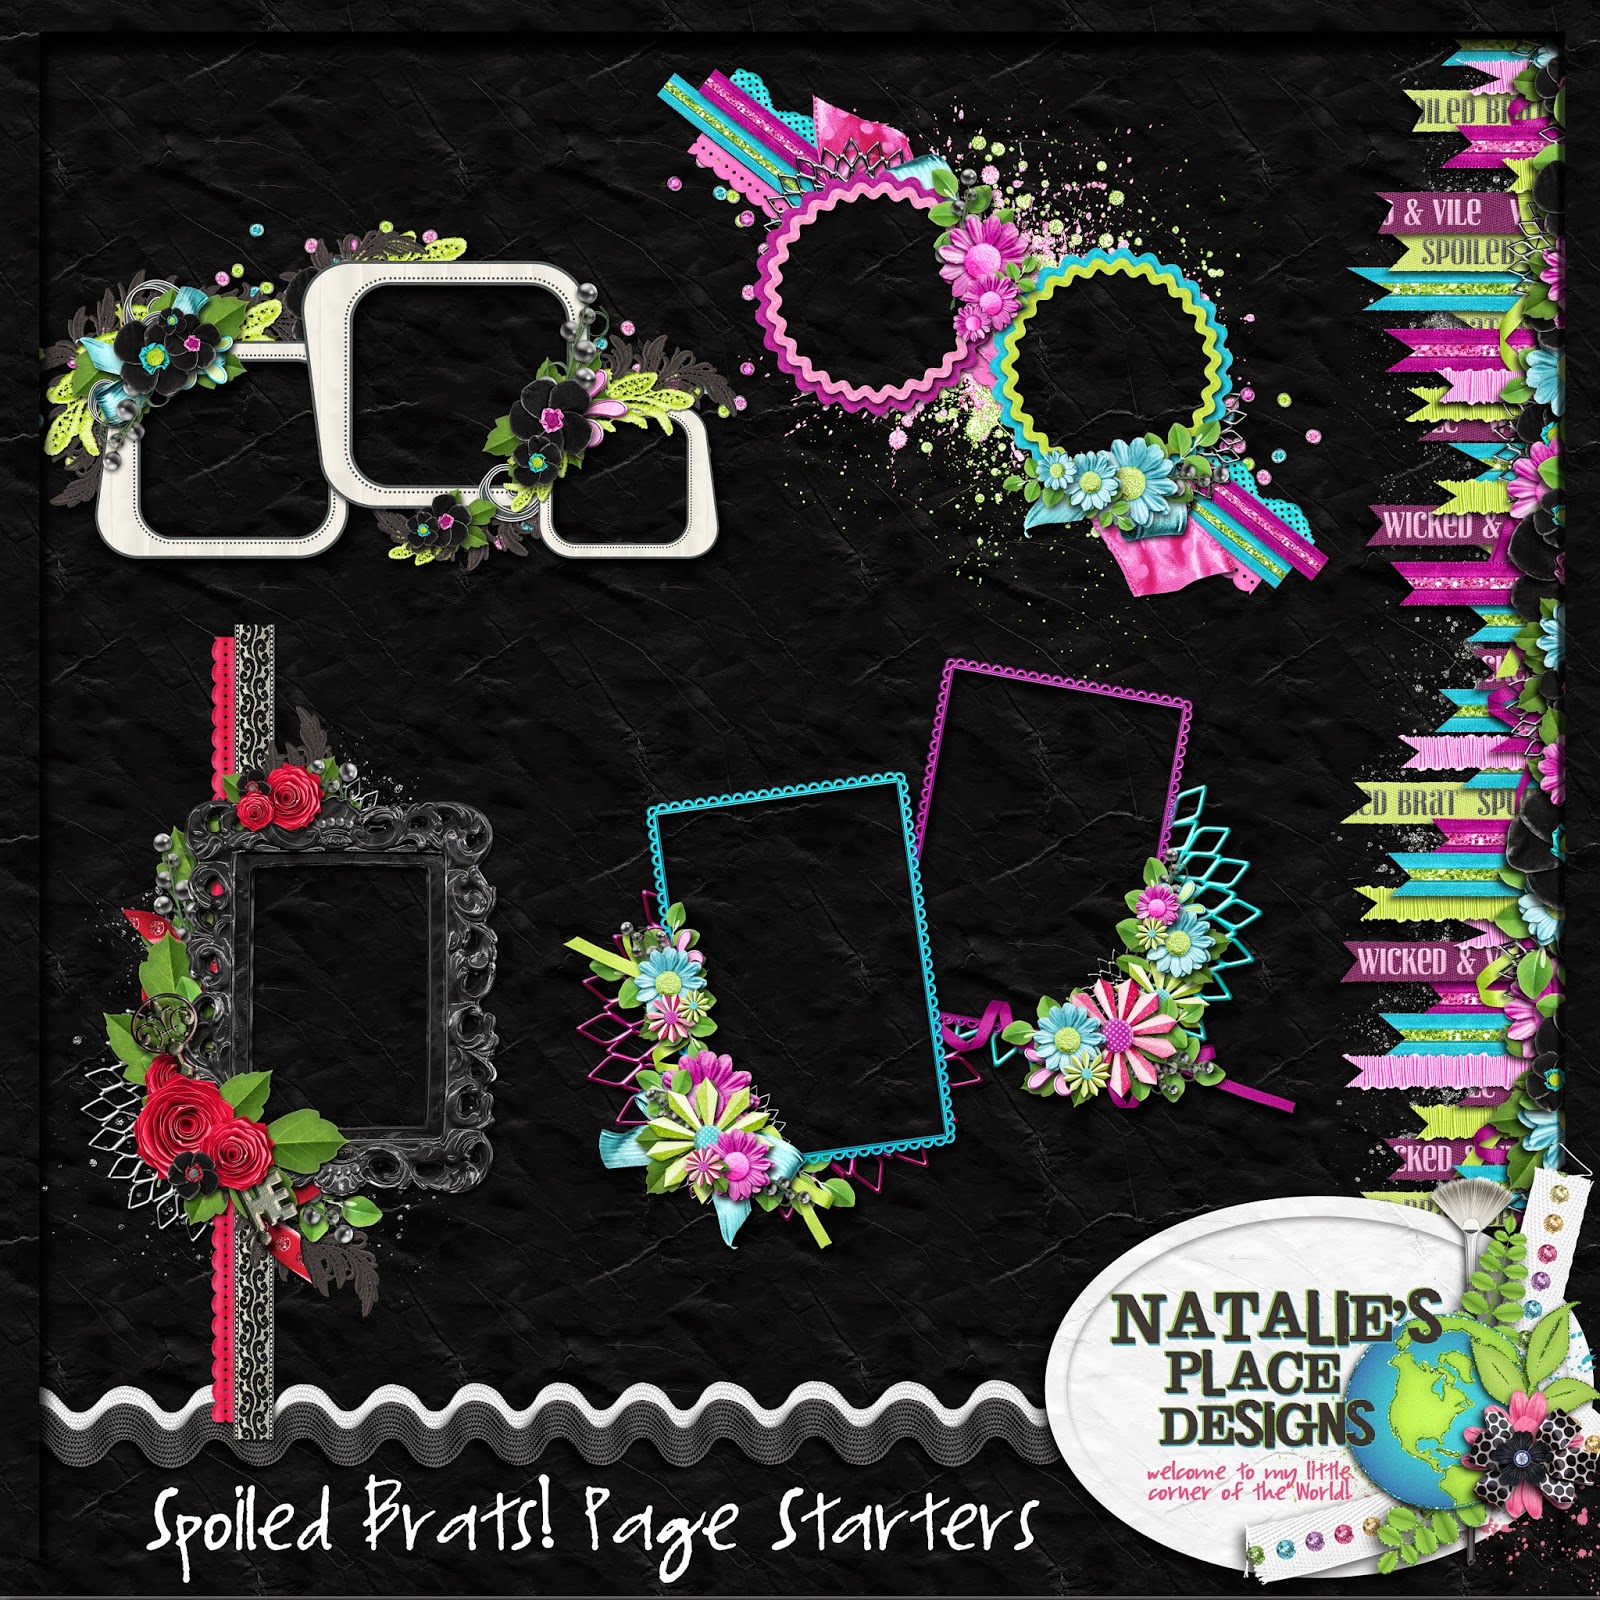 http://www.nataliesplacedesigns.com/store/p498/Spoiled_Brats%21_Page_Starters.html